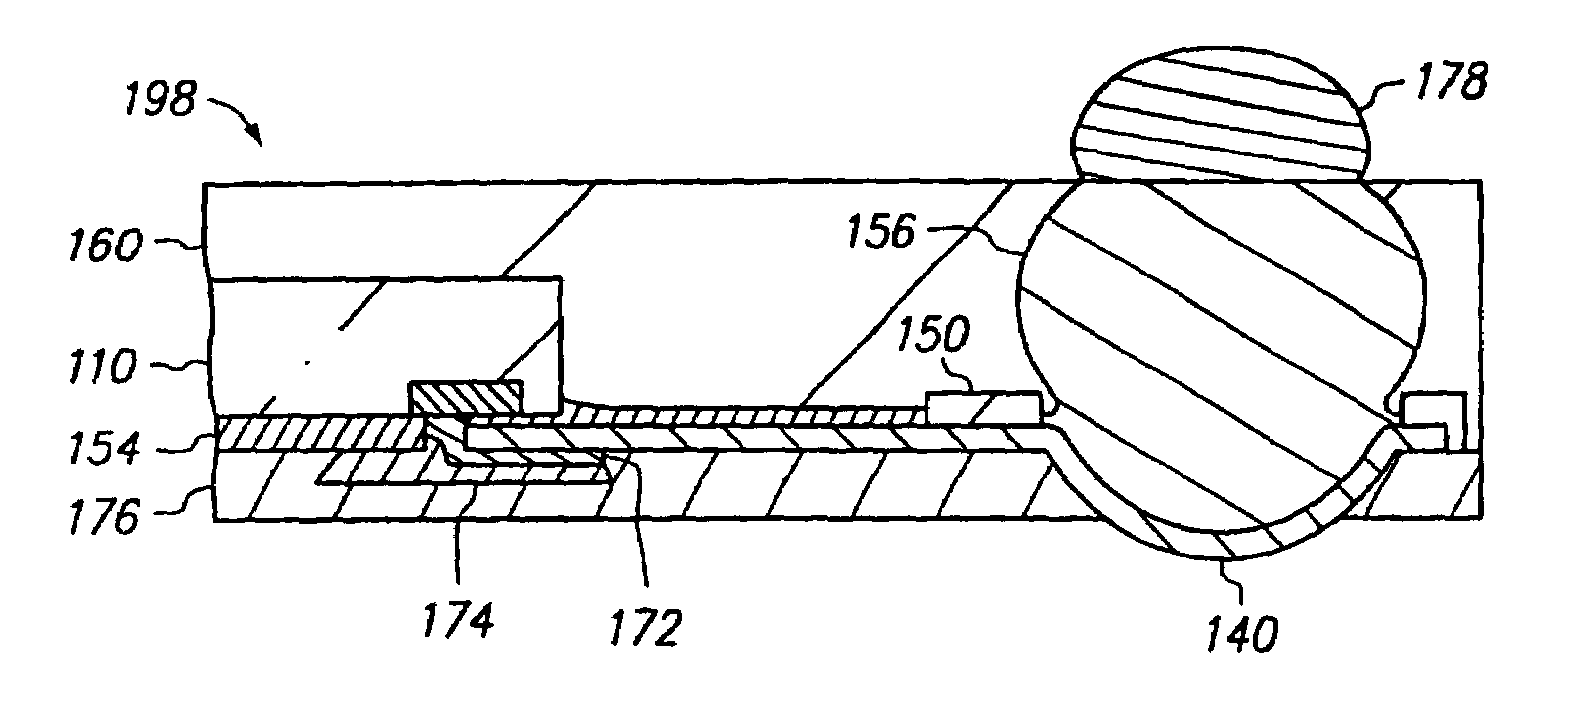 Semiconductor chip assembly with embedded metal particle